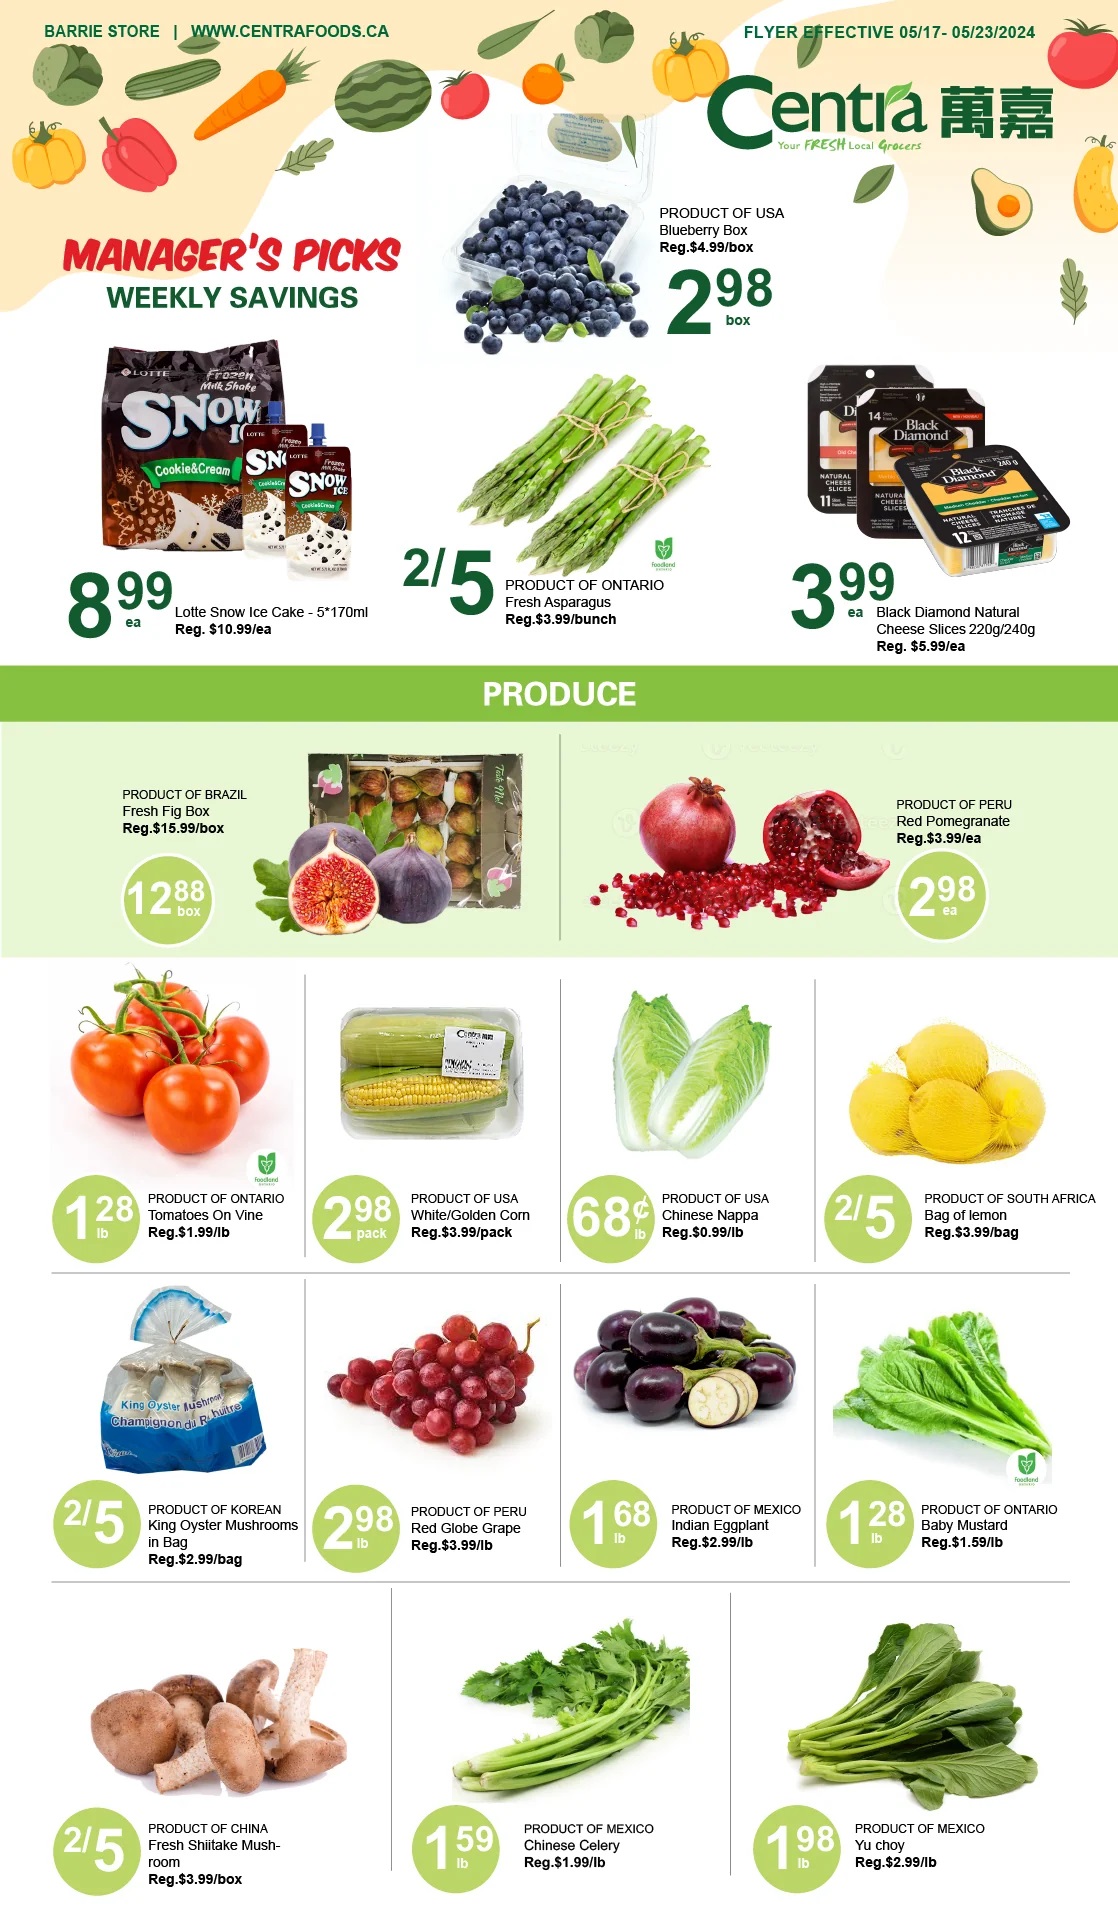 Centra Food Market - Barrie - Weekly Flyer Specials